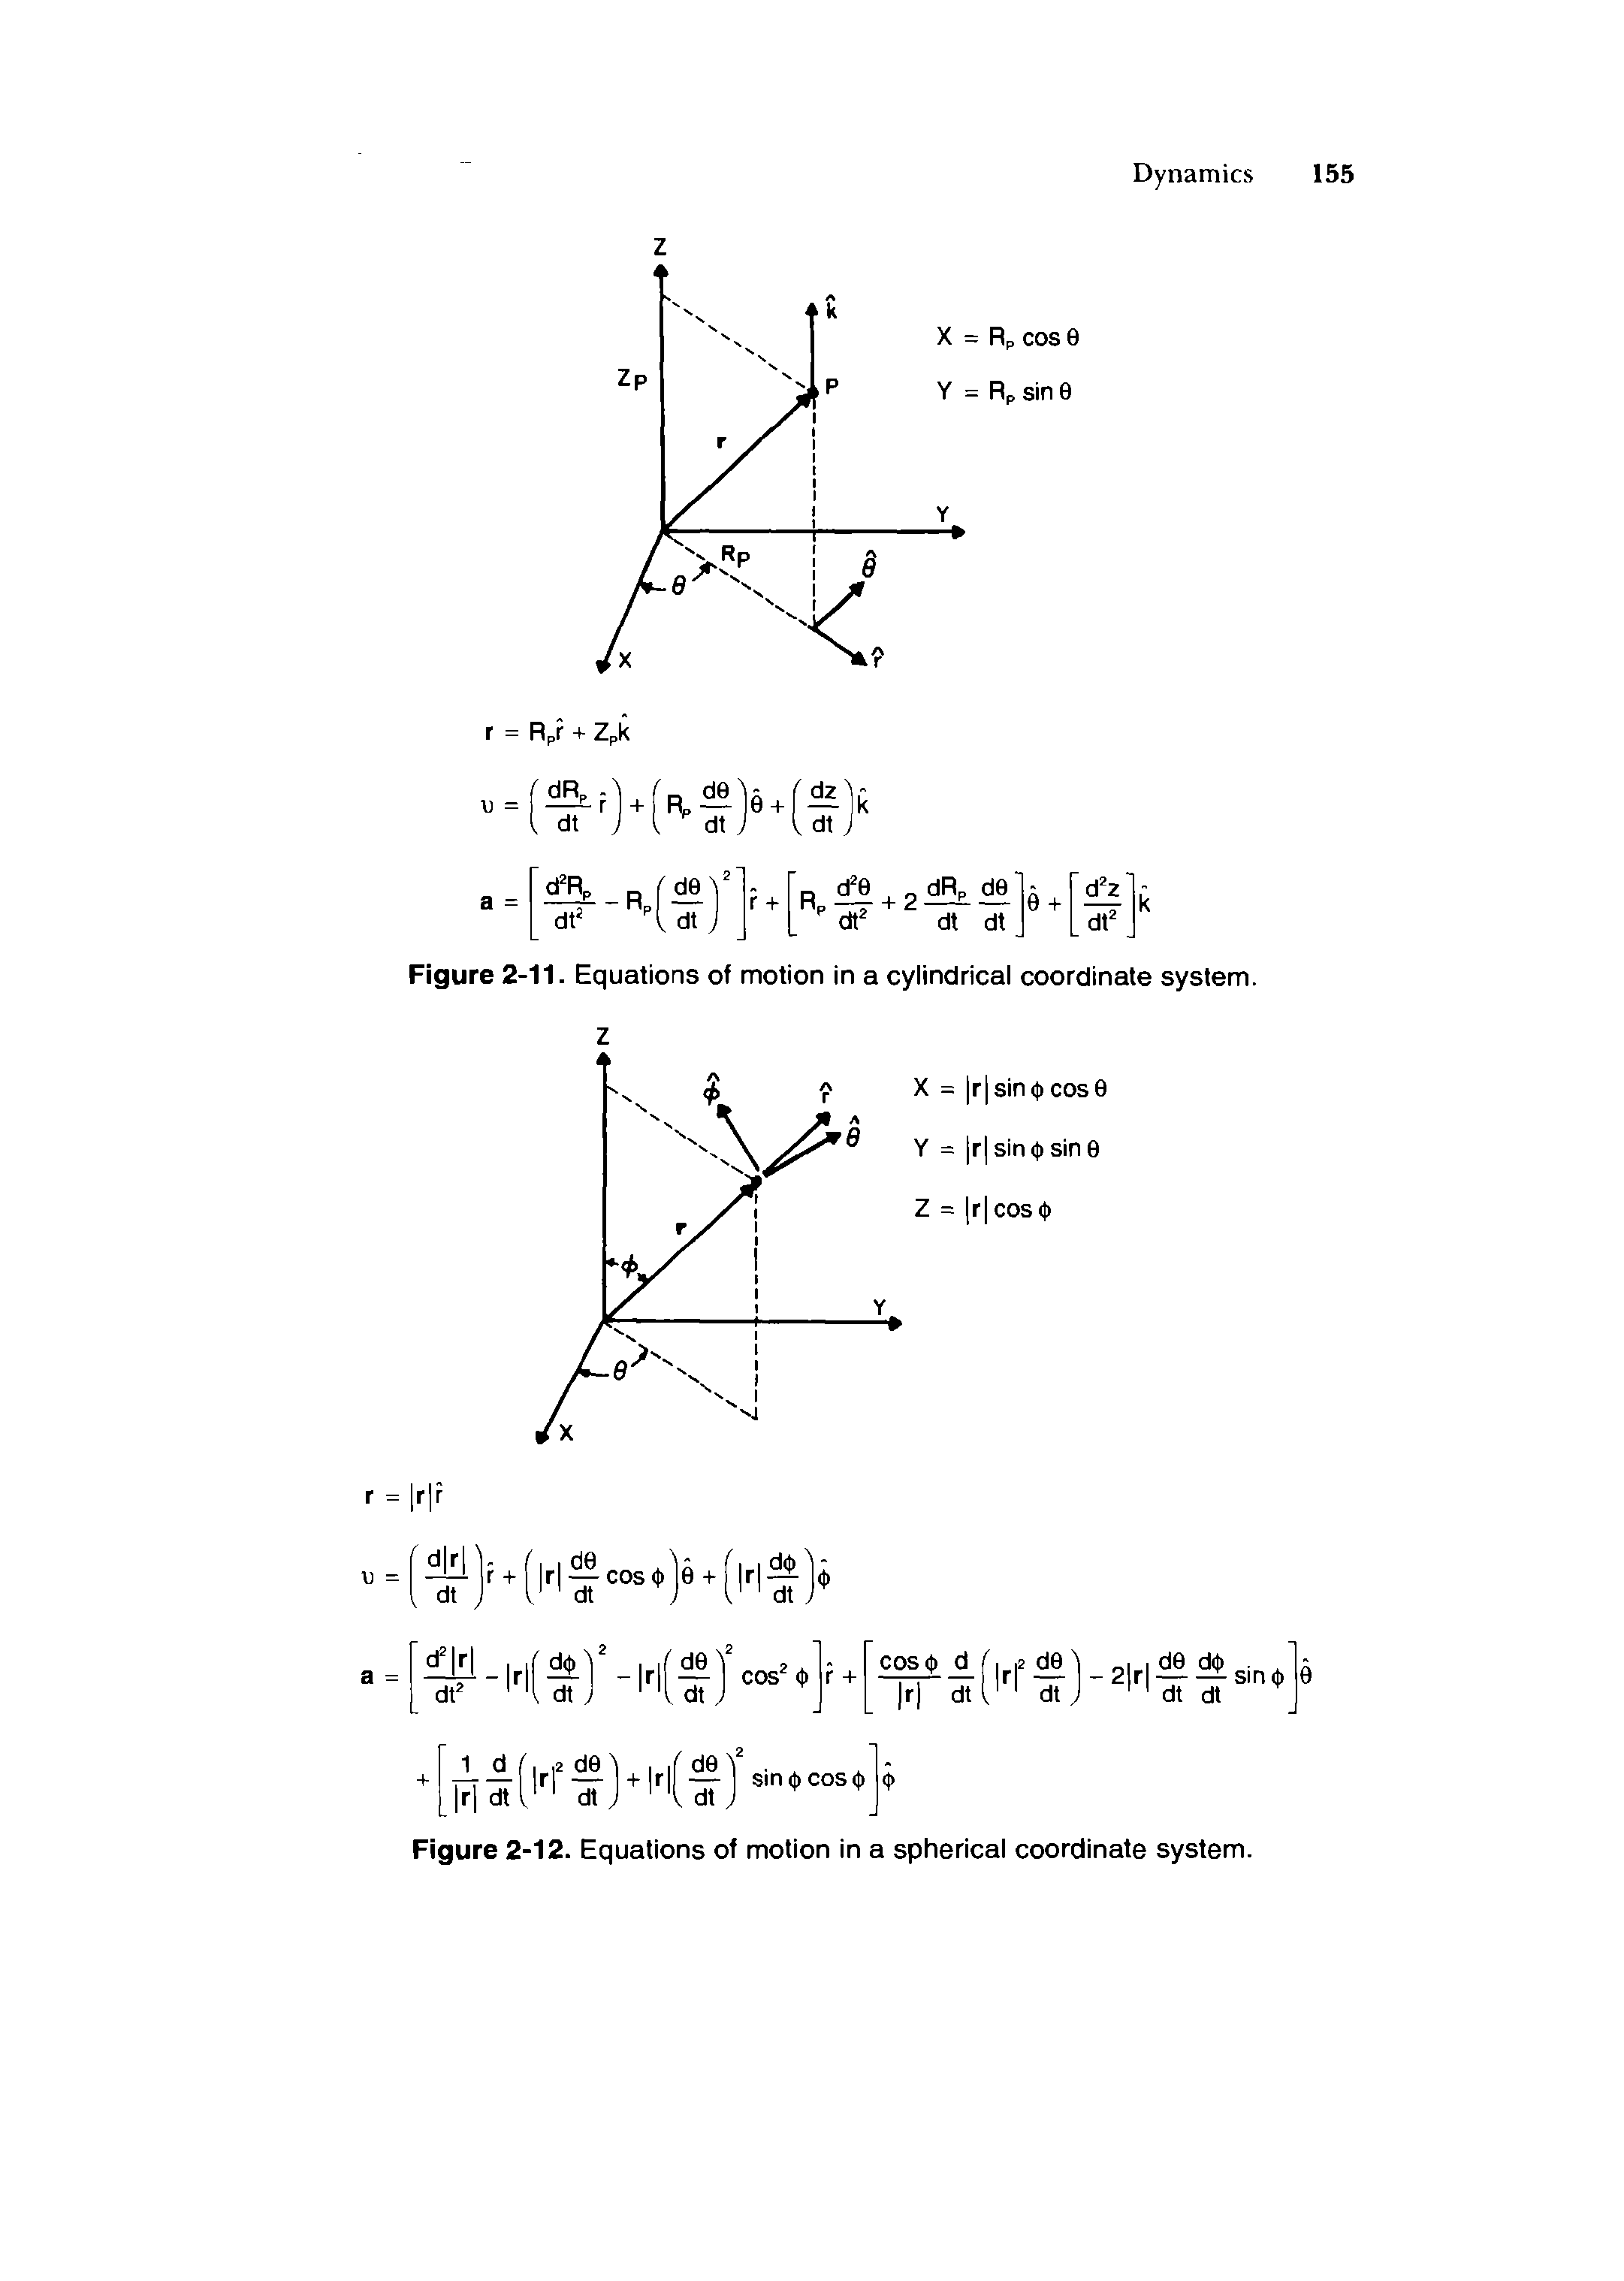 Figure 2-12. Equations of motion in a spherical coordinate system.